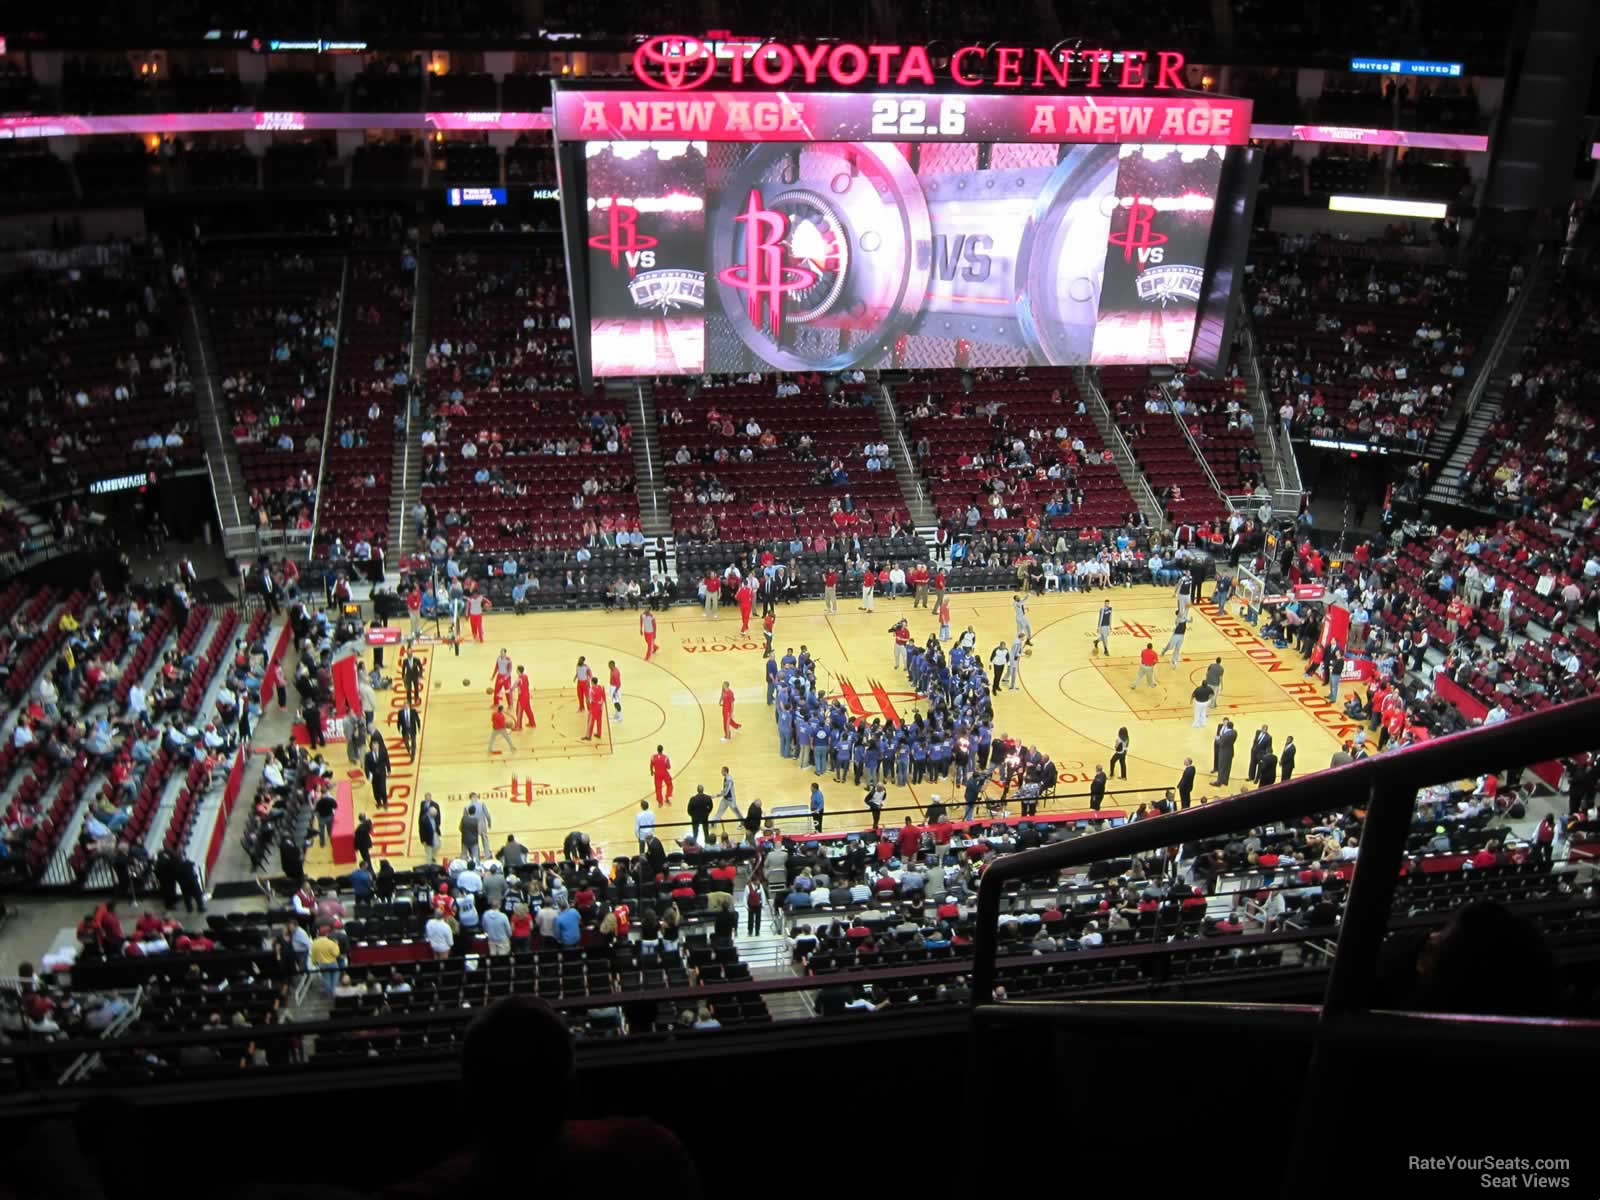 section 428, row 4 seat view  for basketball - toyota center